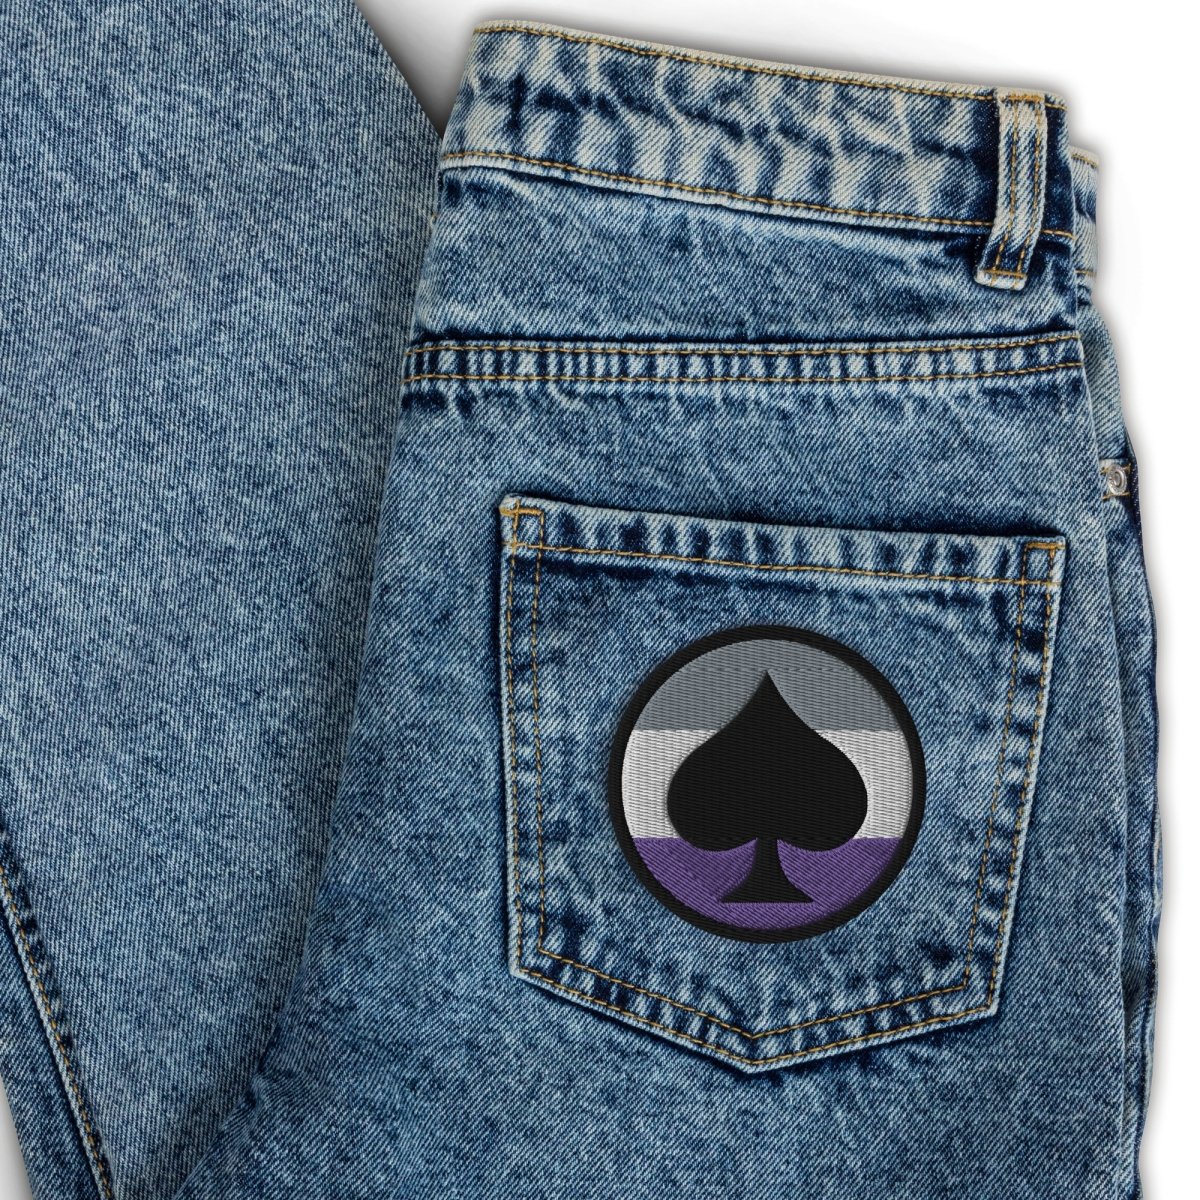 Asexual Ace of Spades Embroidered Patch - On Trend Shirts